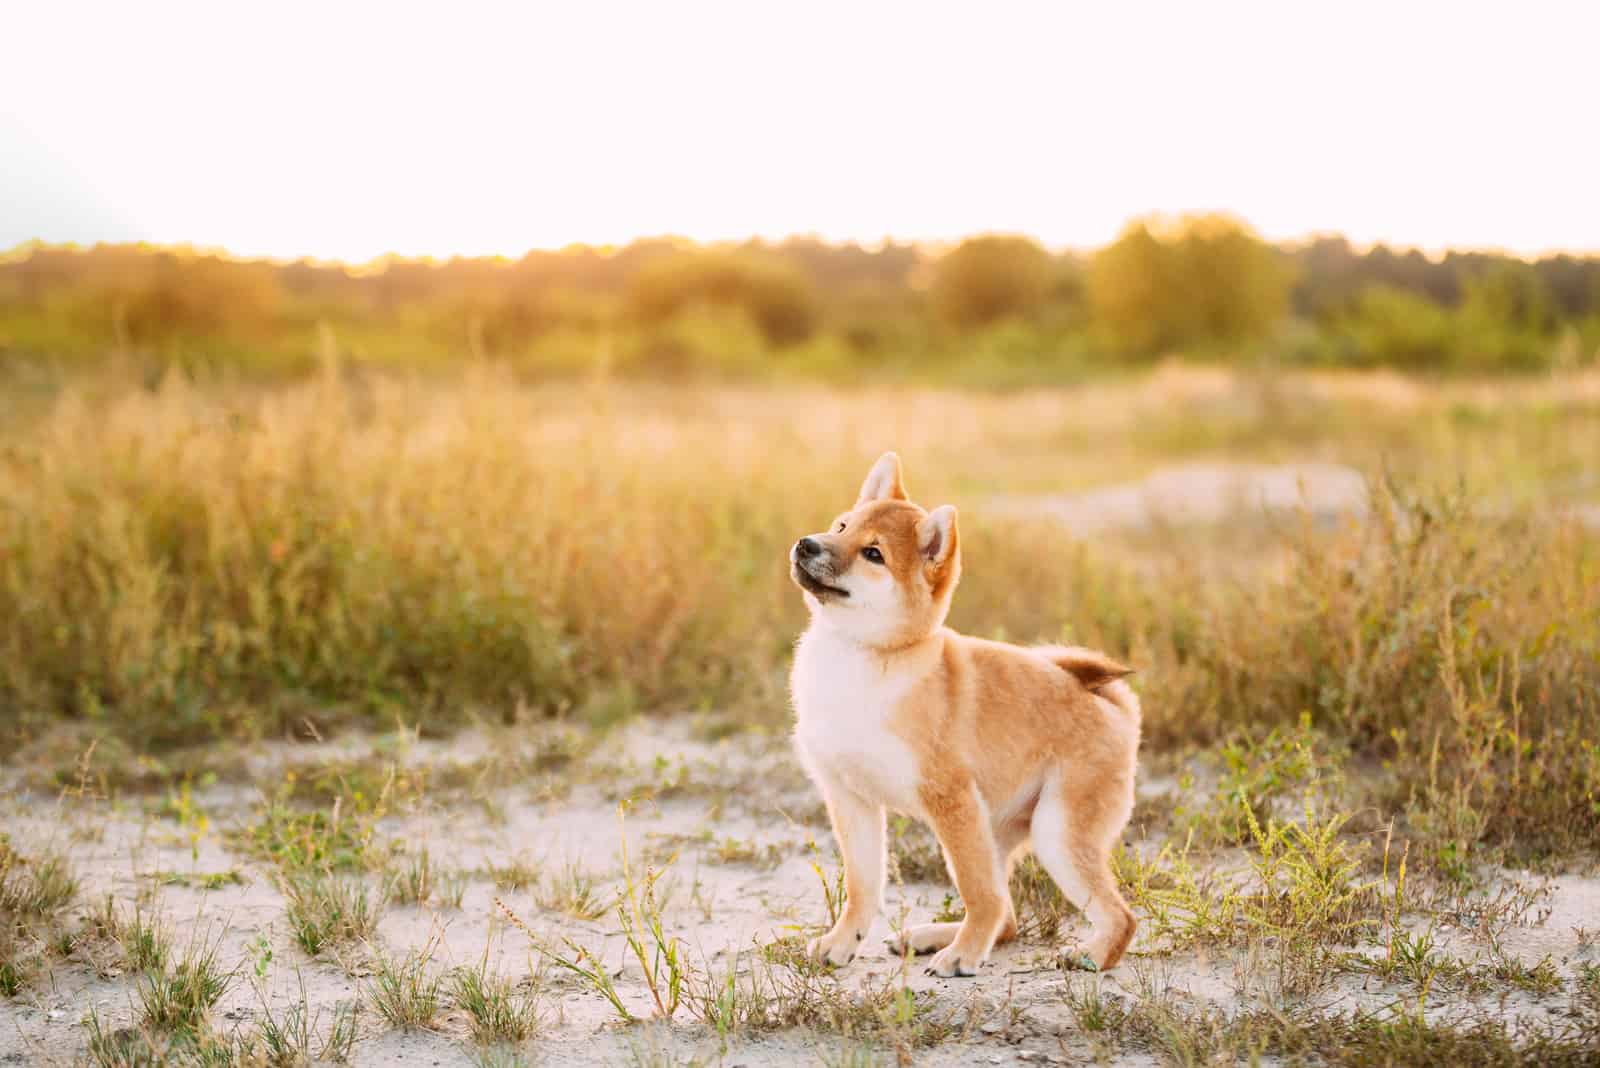 the beautiful Shiba Inu Puppies stands outside and looks around